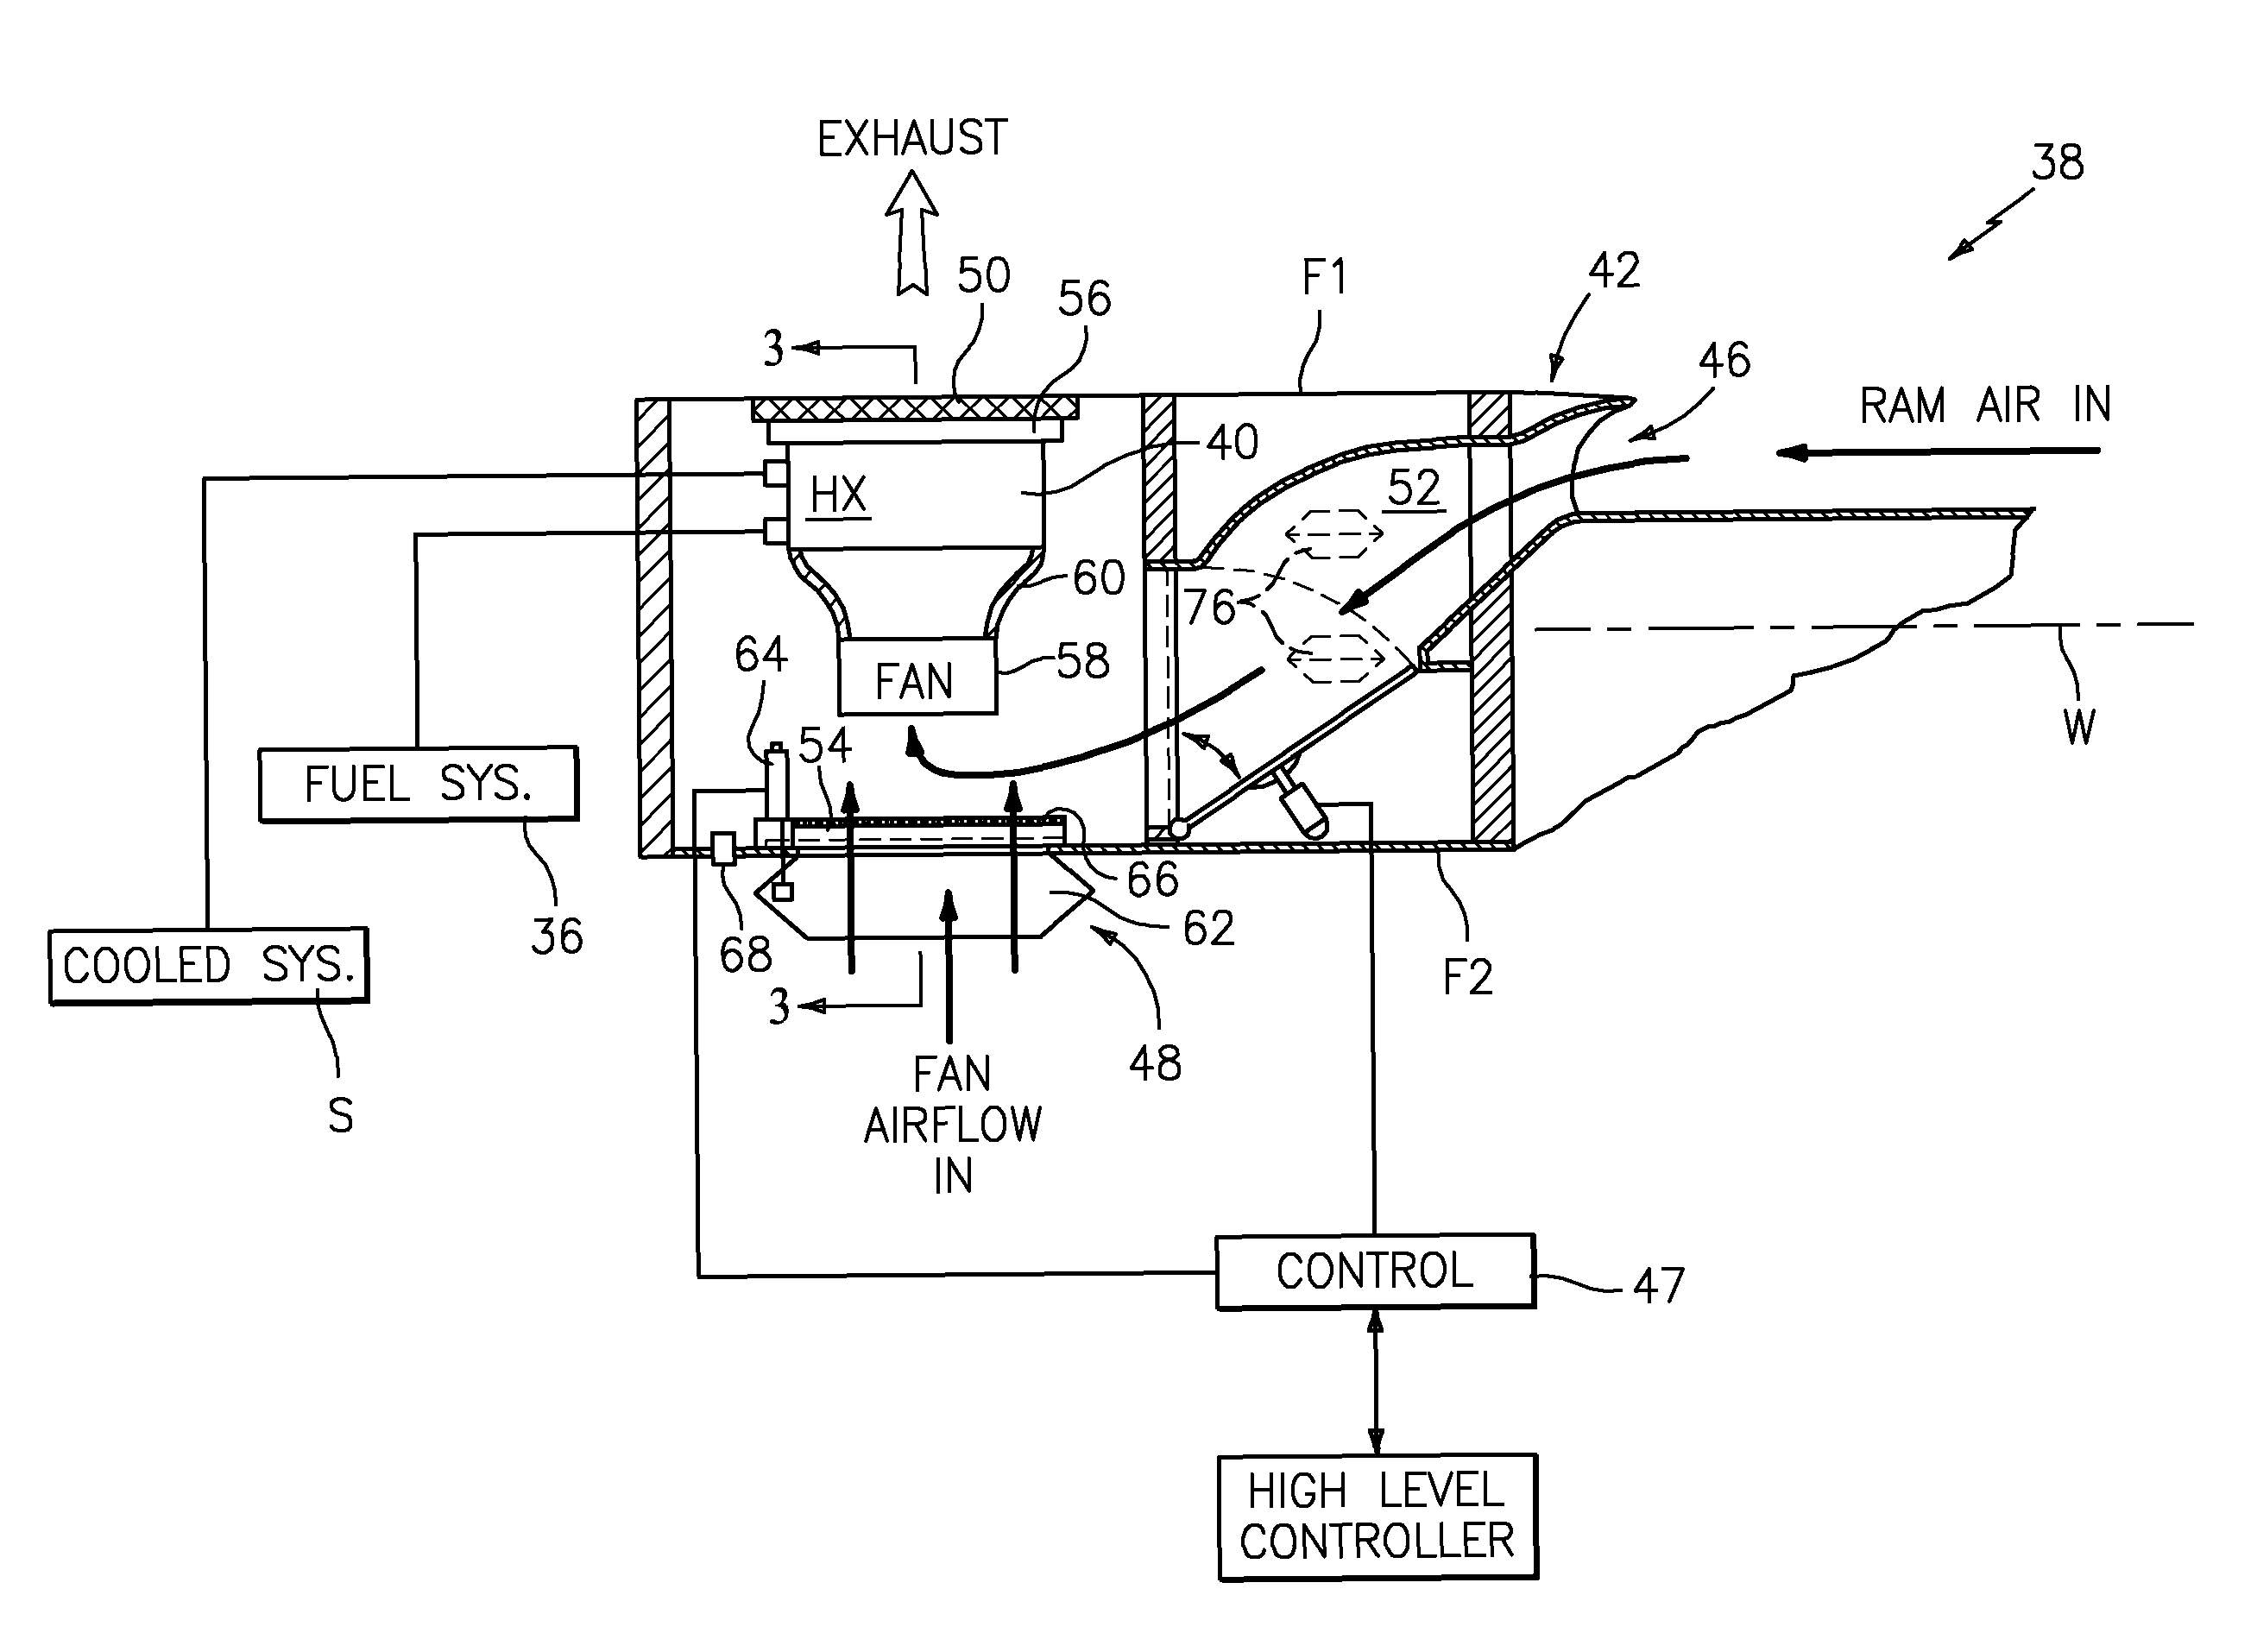 Aircraft thermal management system with reduced exhaust re-ingestion